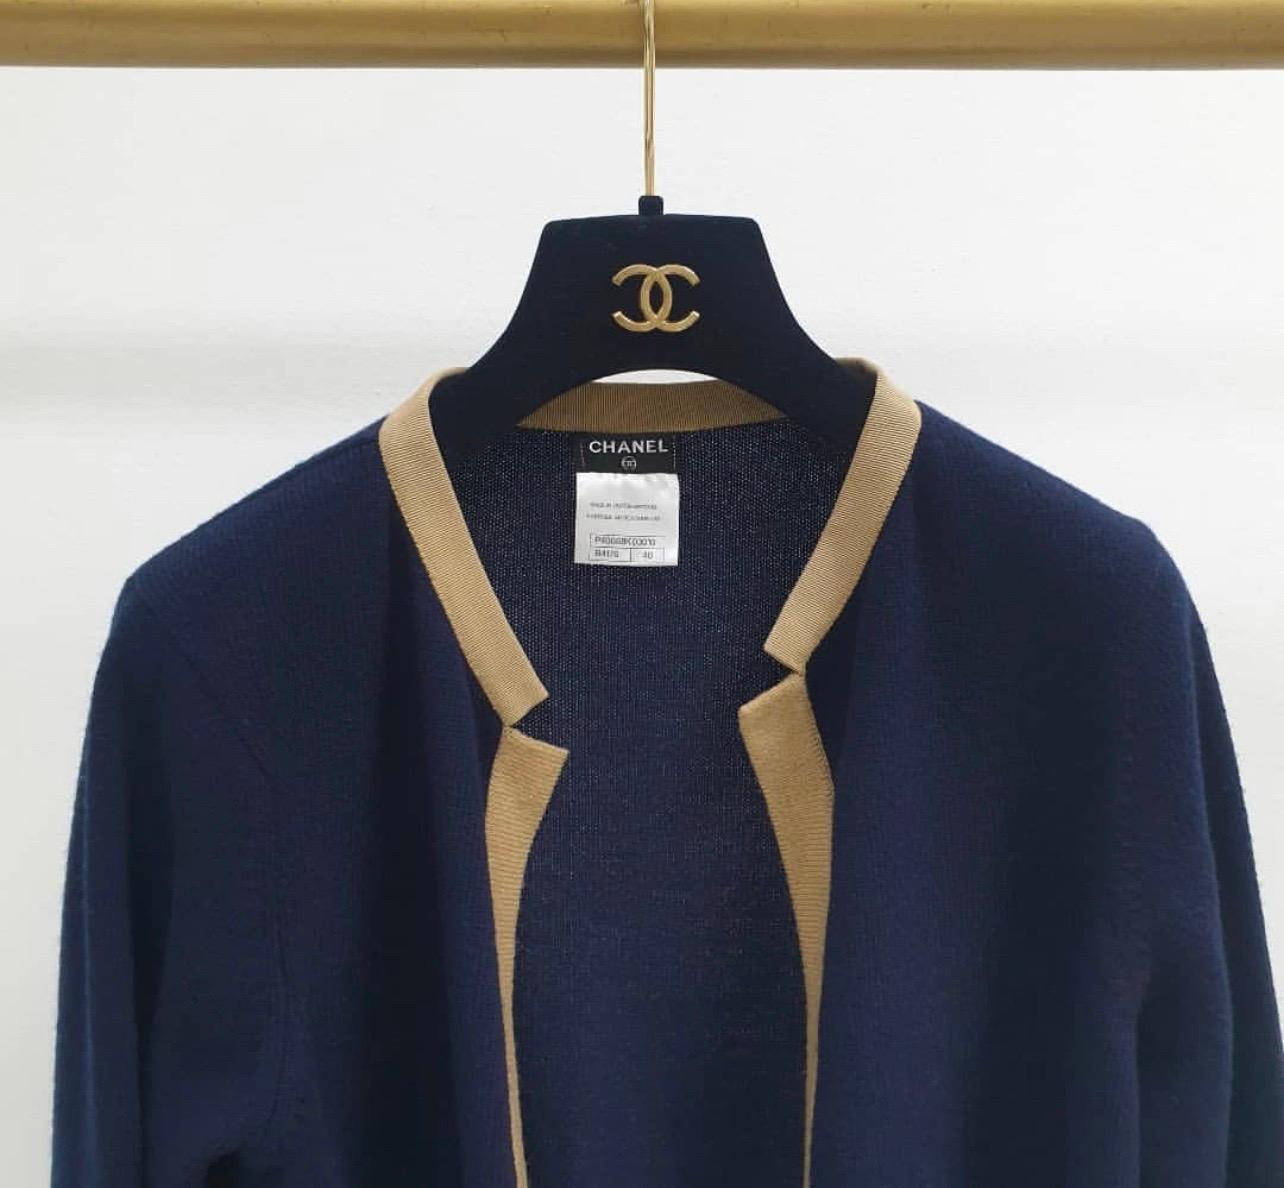 From 2012.
Navy cashmere Beige Trimed
Sz.40
Chanel pin on left pocket.
Very good condition.
Hanger is not included.
For buyers from EU we can provide shipping from Poland. Please demand if you need.
